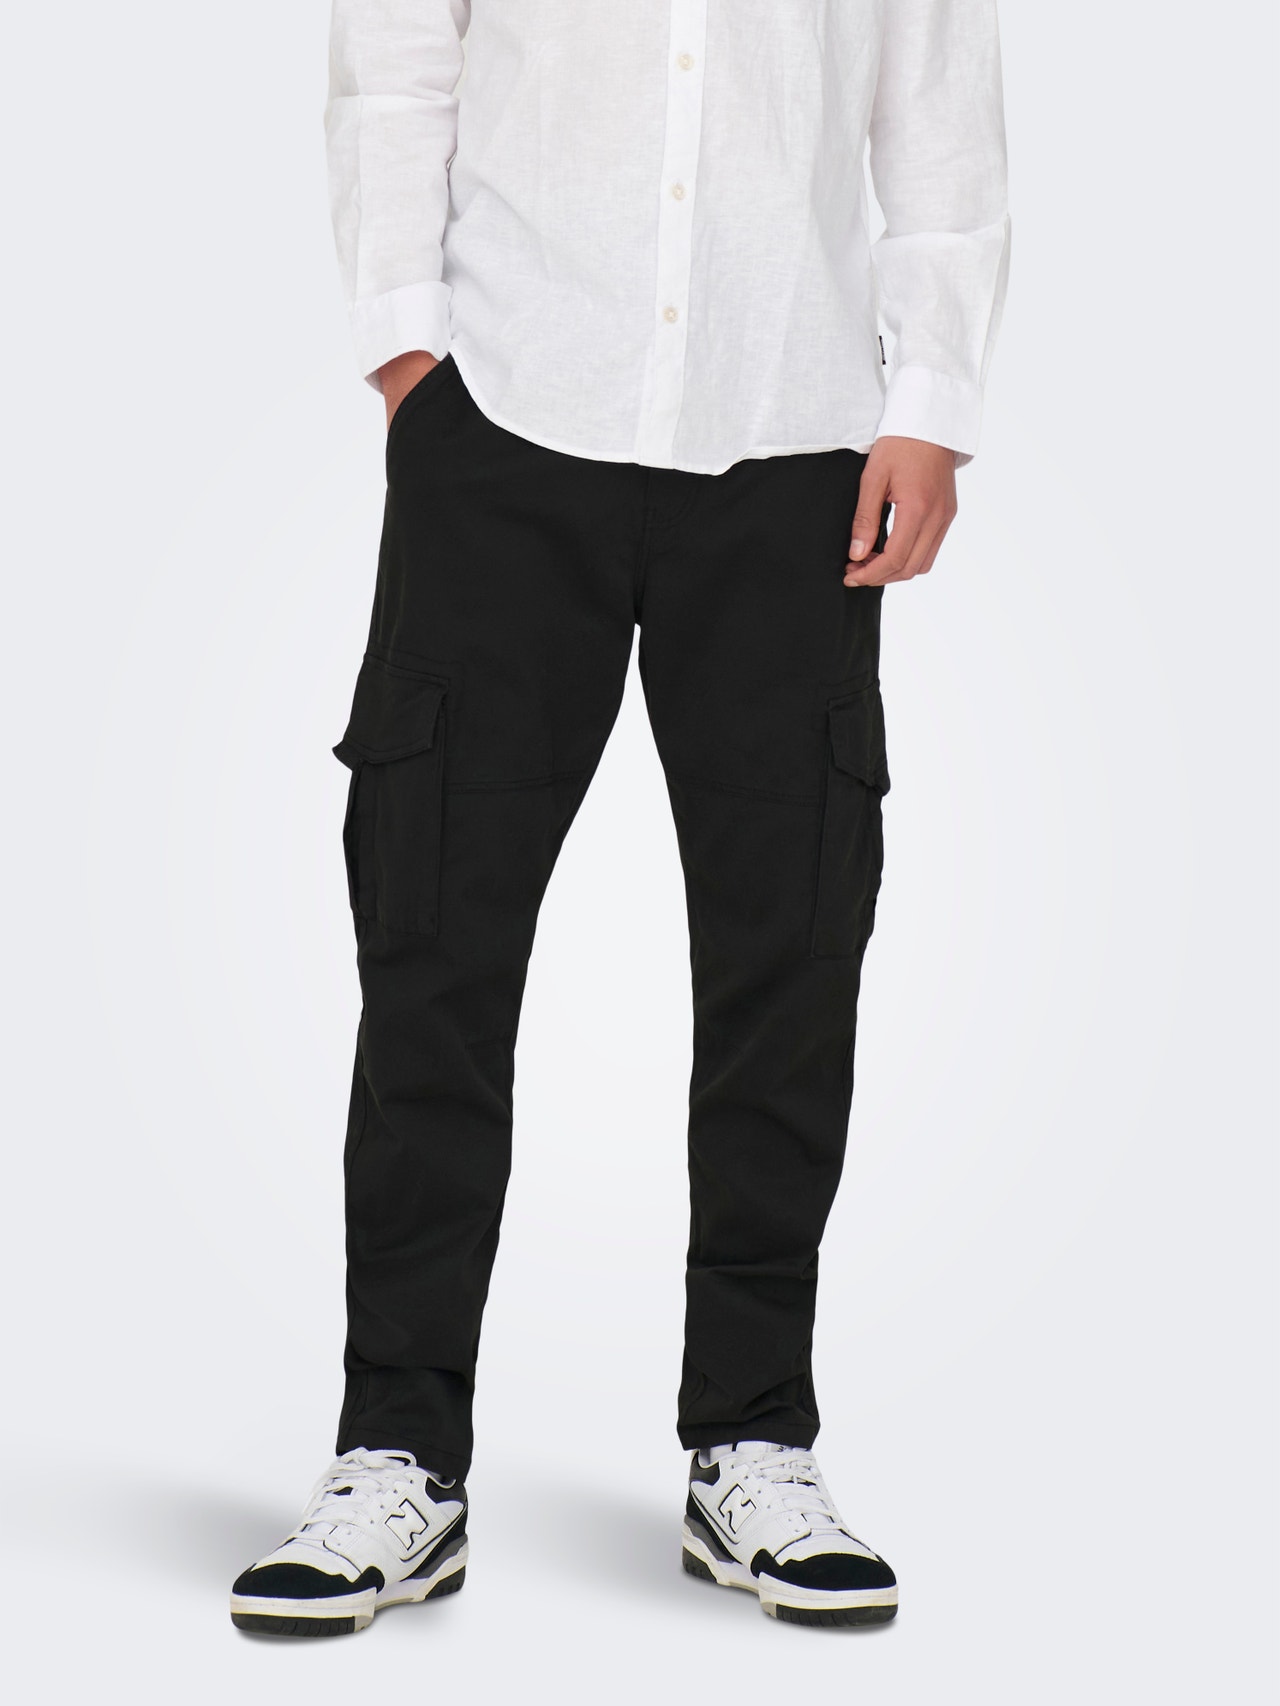 ONLY & SONS Chino pants -Black - 22025431